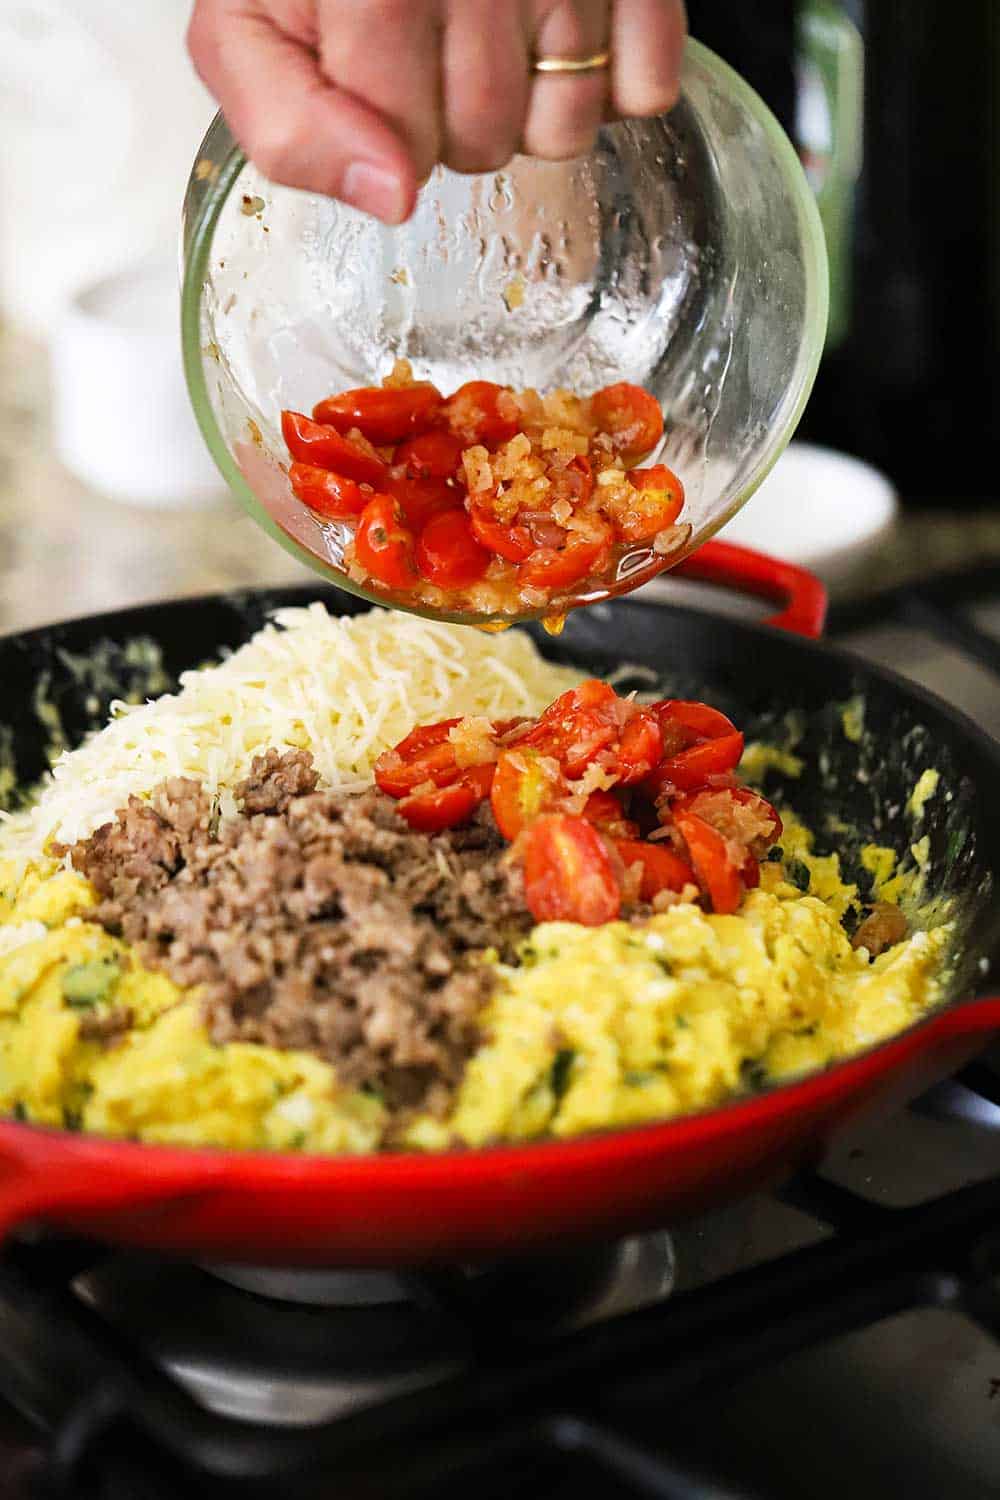 A hand transferring sautéd tomatoes from a small glass bowl into a large skillet filled with scrambled eggs, cooked sausage, and shredded mozzarella cheese. 